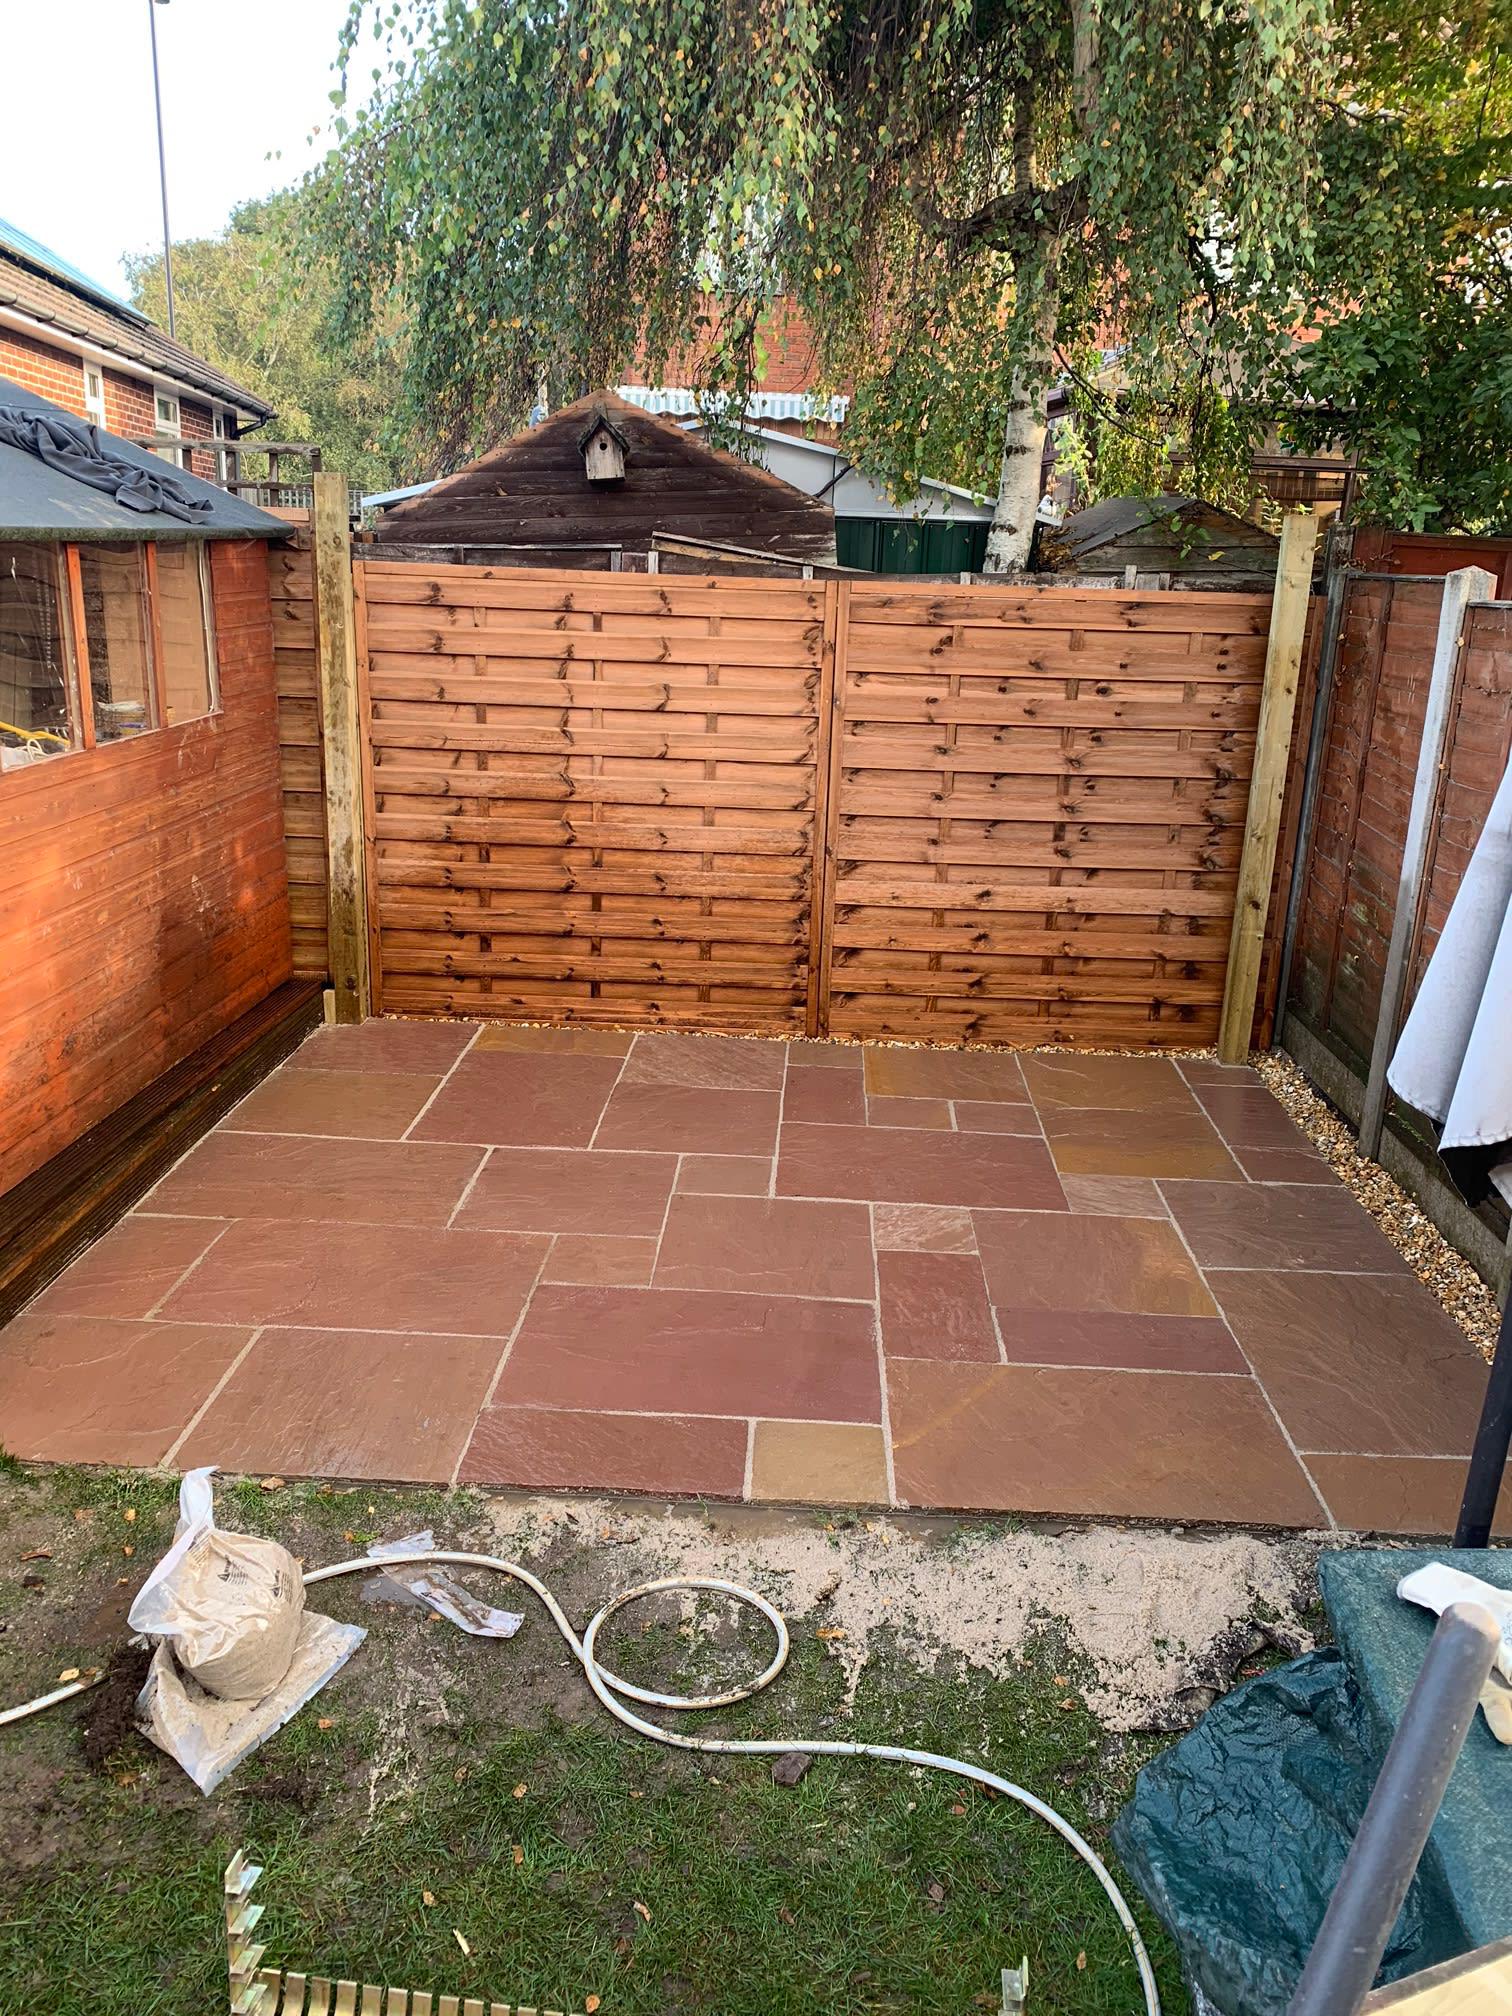 Digweed Landscapes Eastleigh 07769 619937